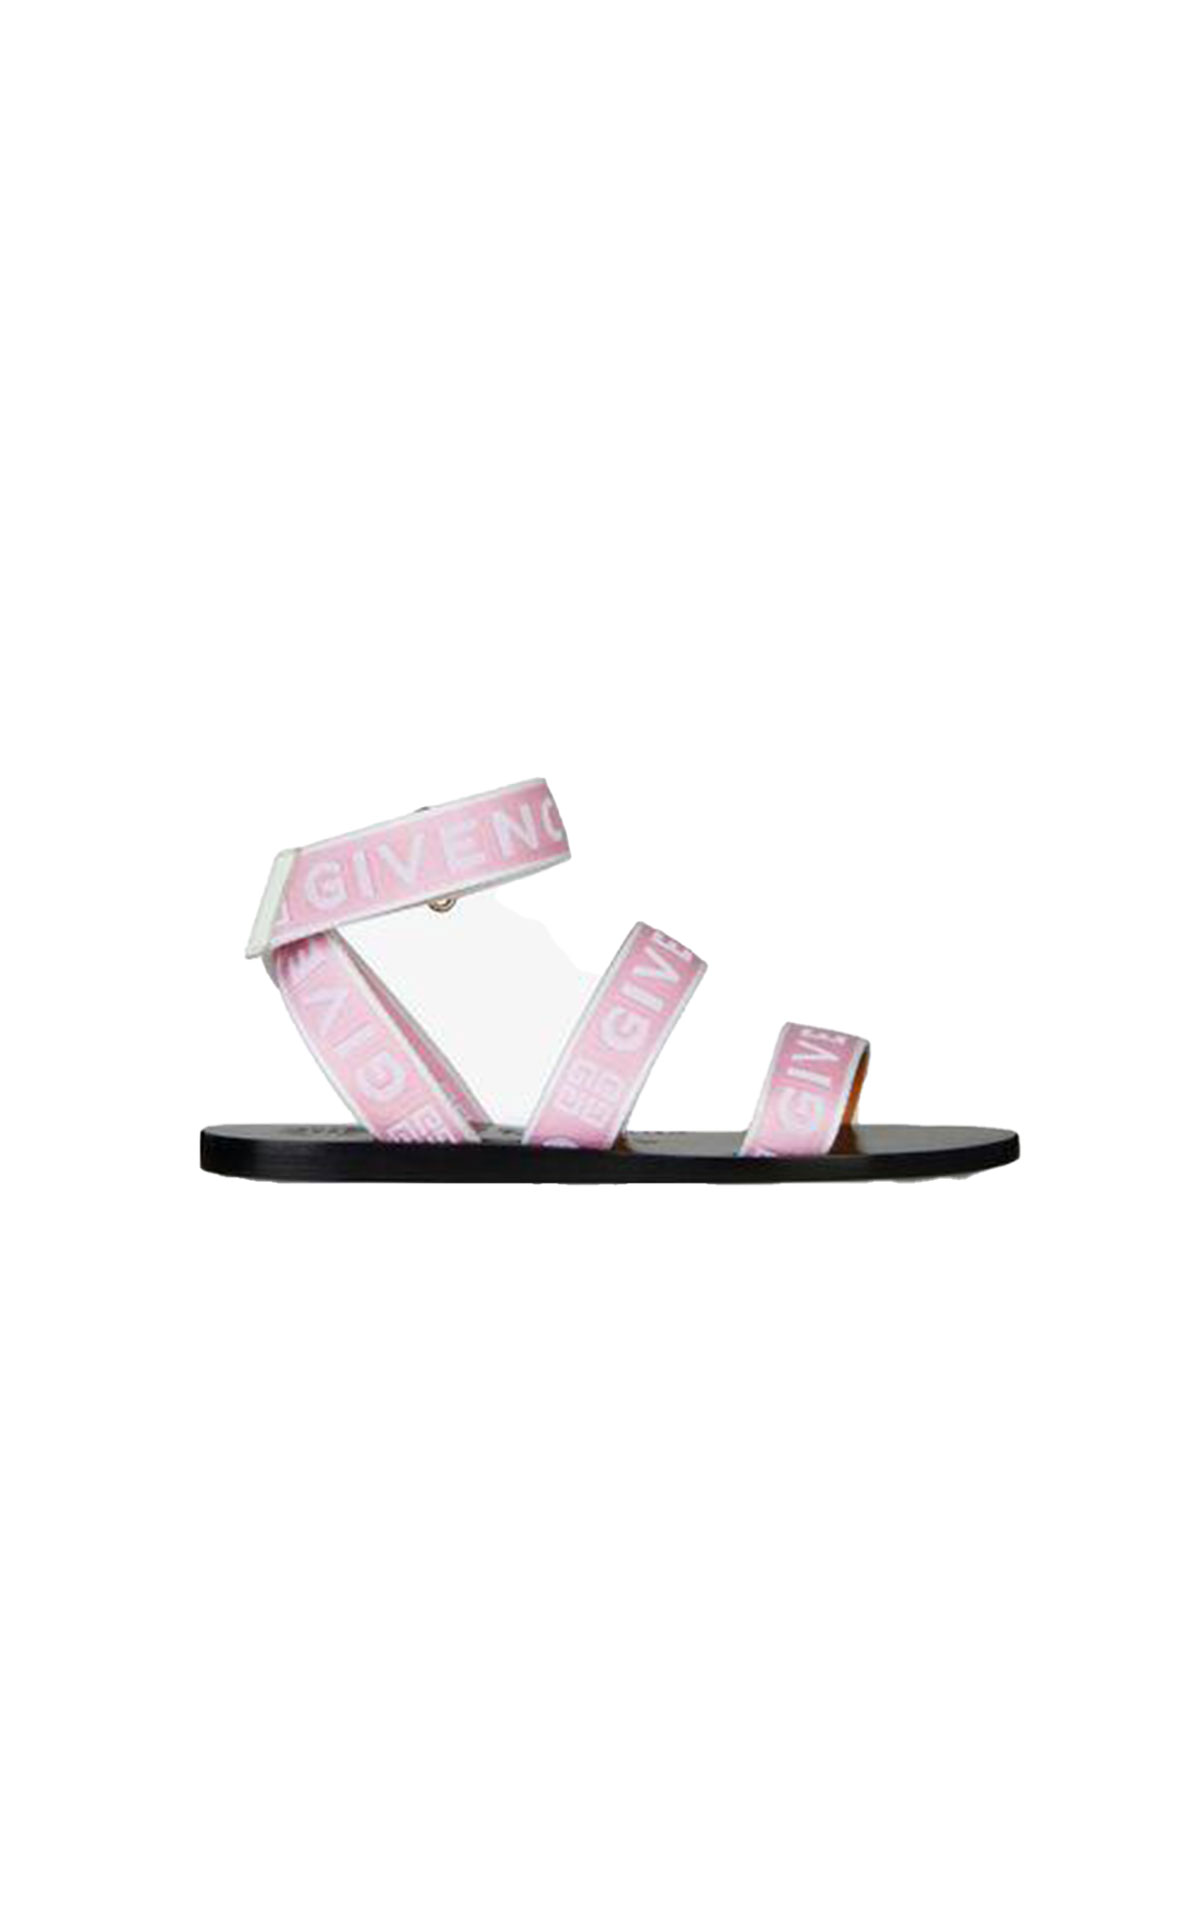 Givenchy Strap ankle sandals from Bicester Village